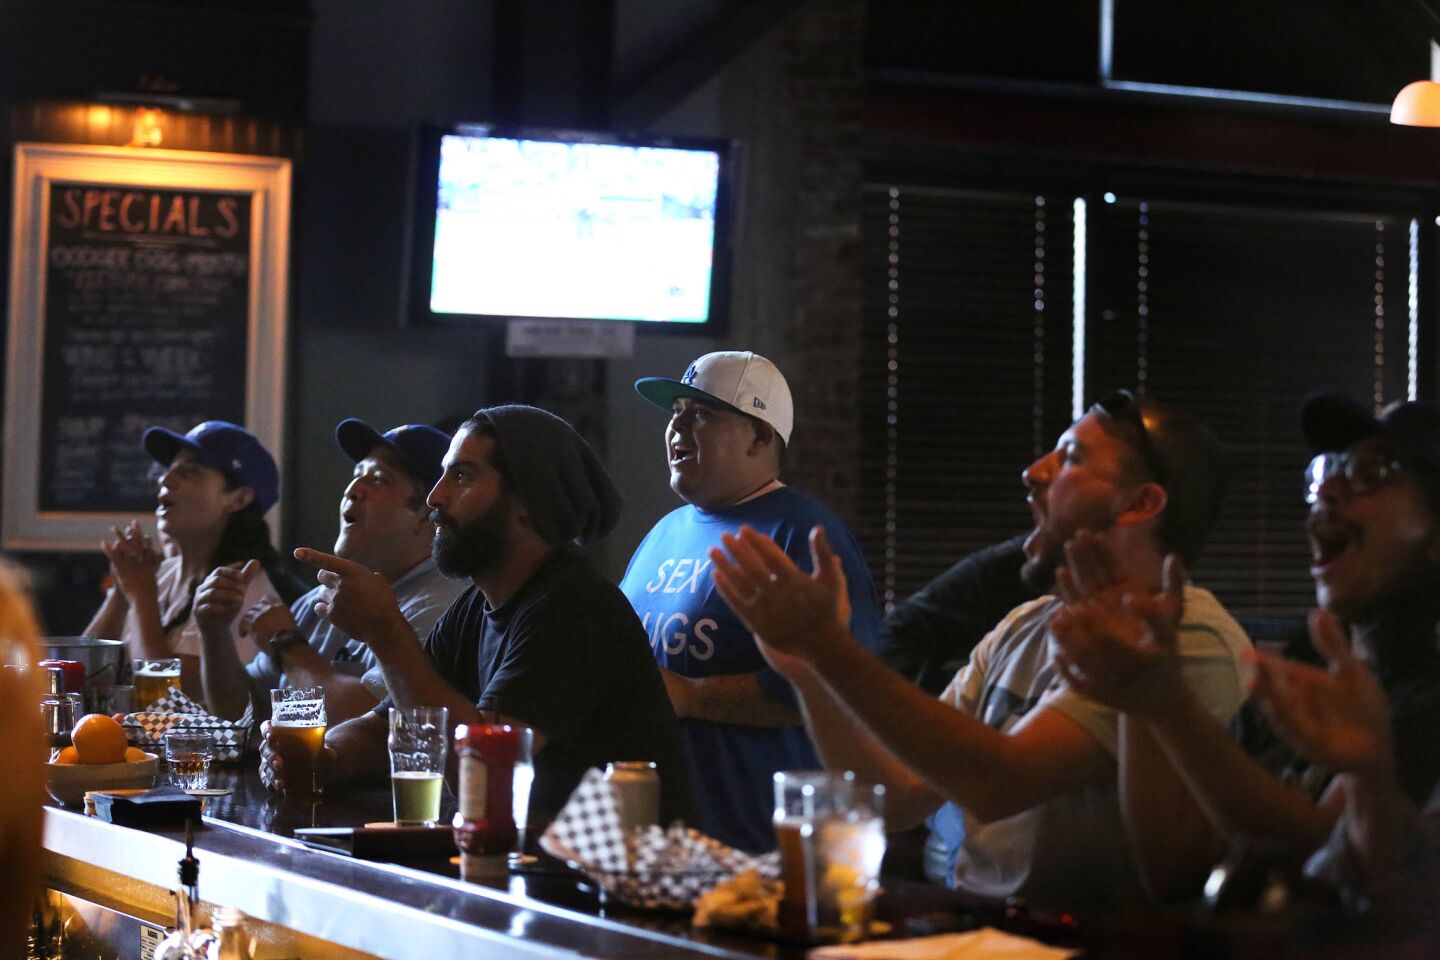 Fans cheer on the Dodgers as they watch the game against the Washington Nationals at the Greyhound Bar & Grill.